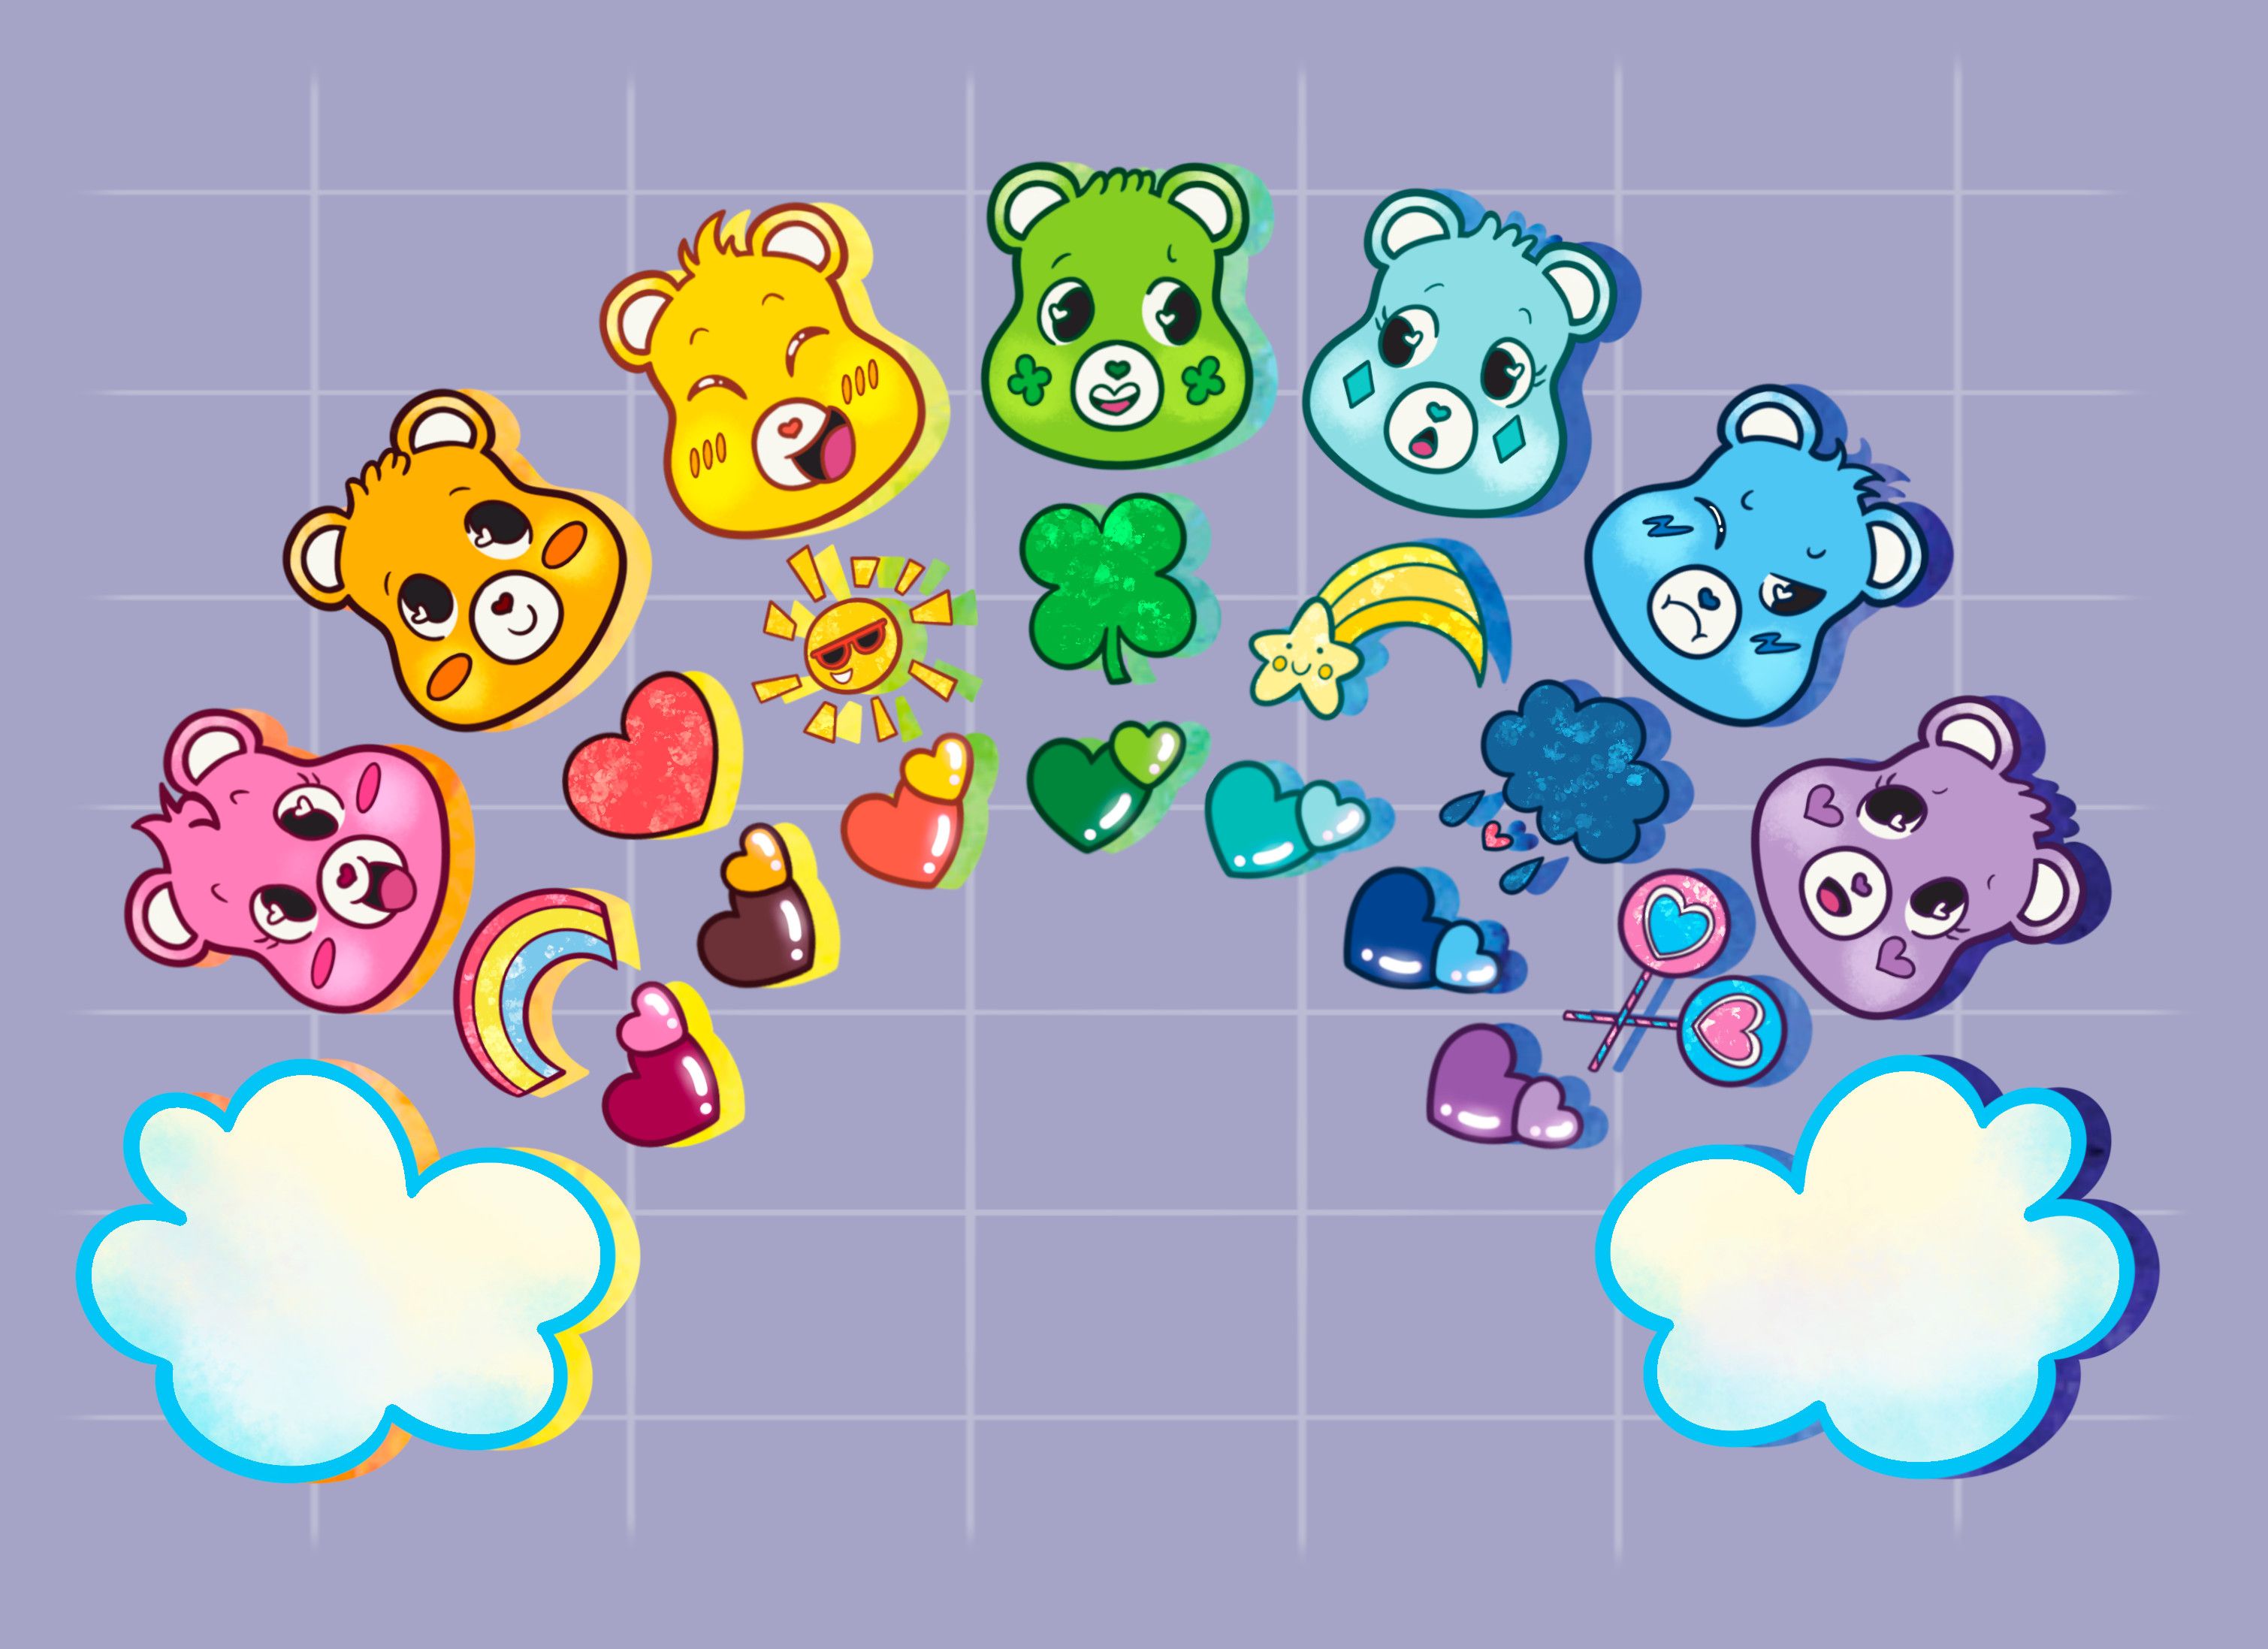 Care bears and friends with clouds - Care Bears, rainbows